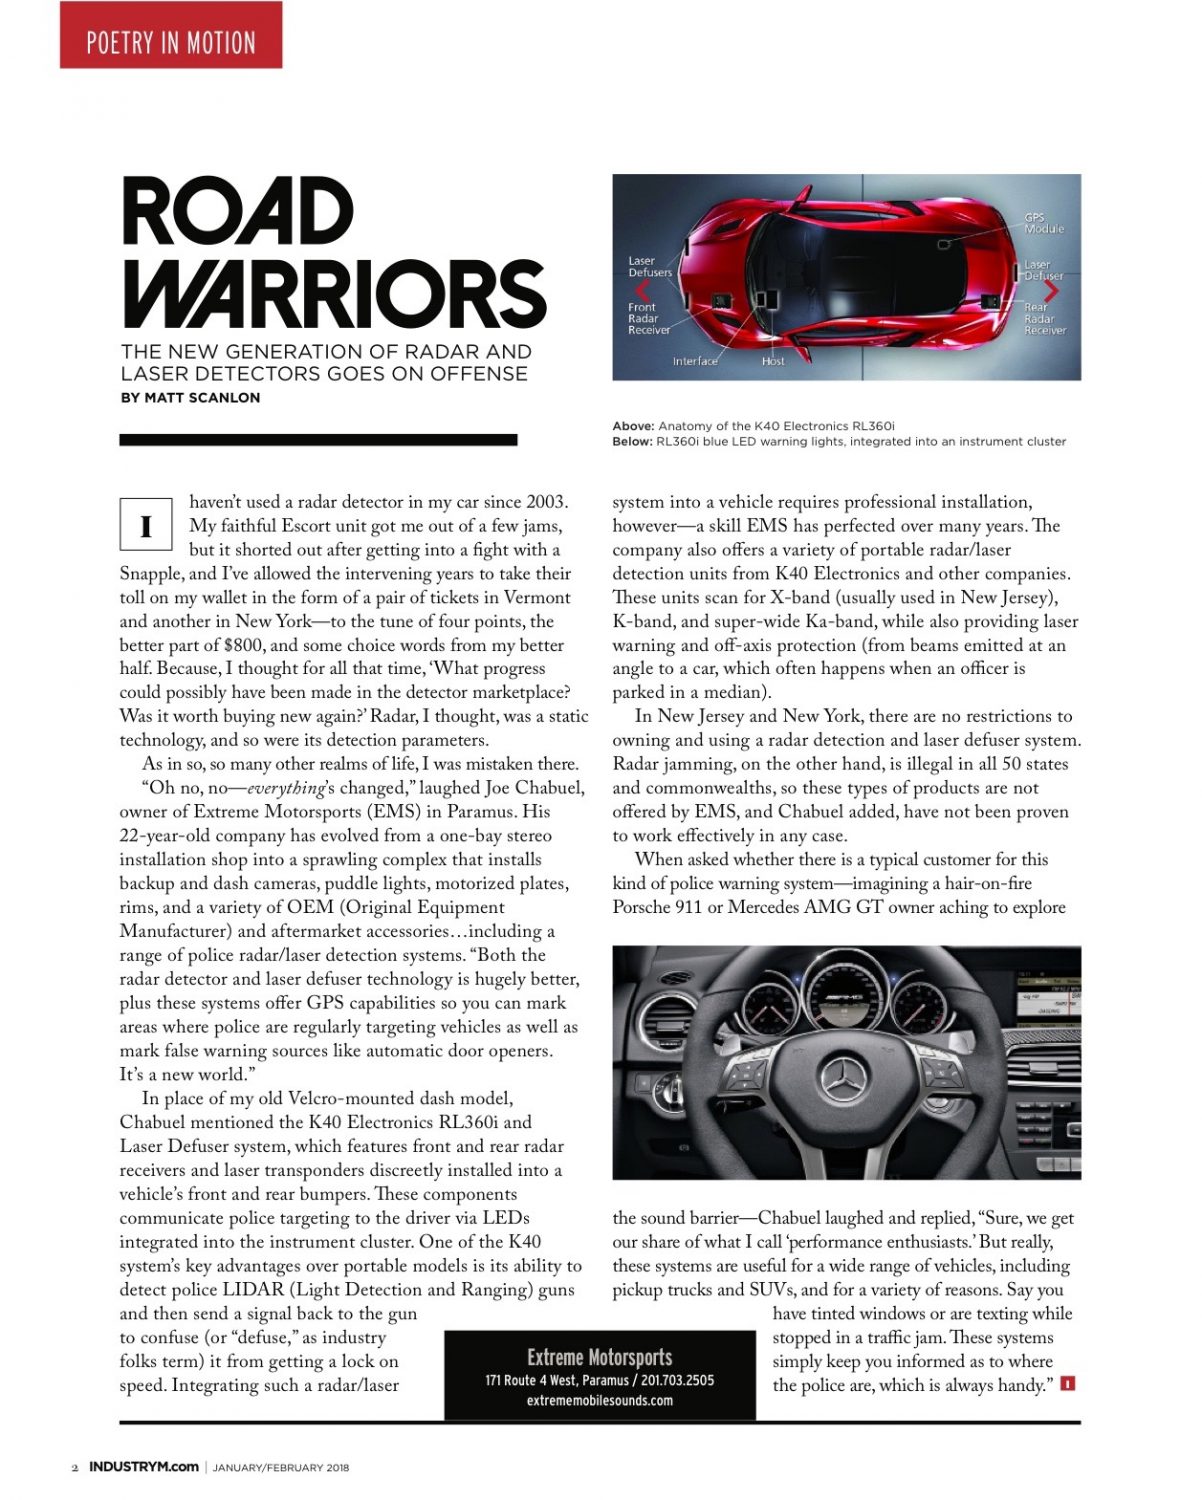 K40 article in Mobile Electronics Magazine